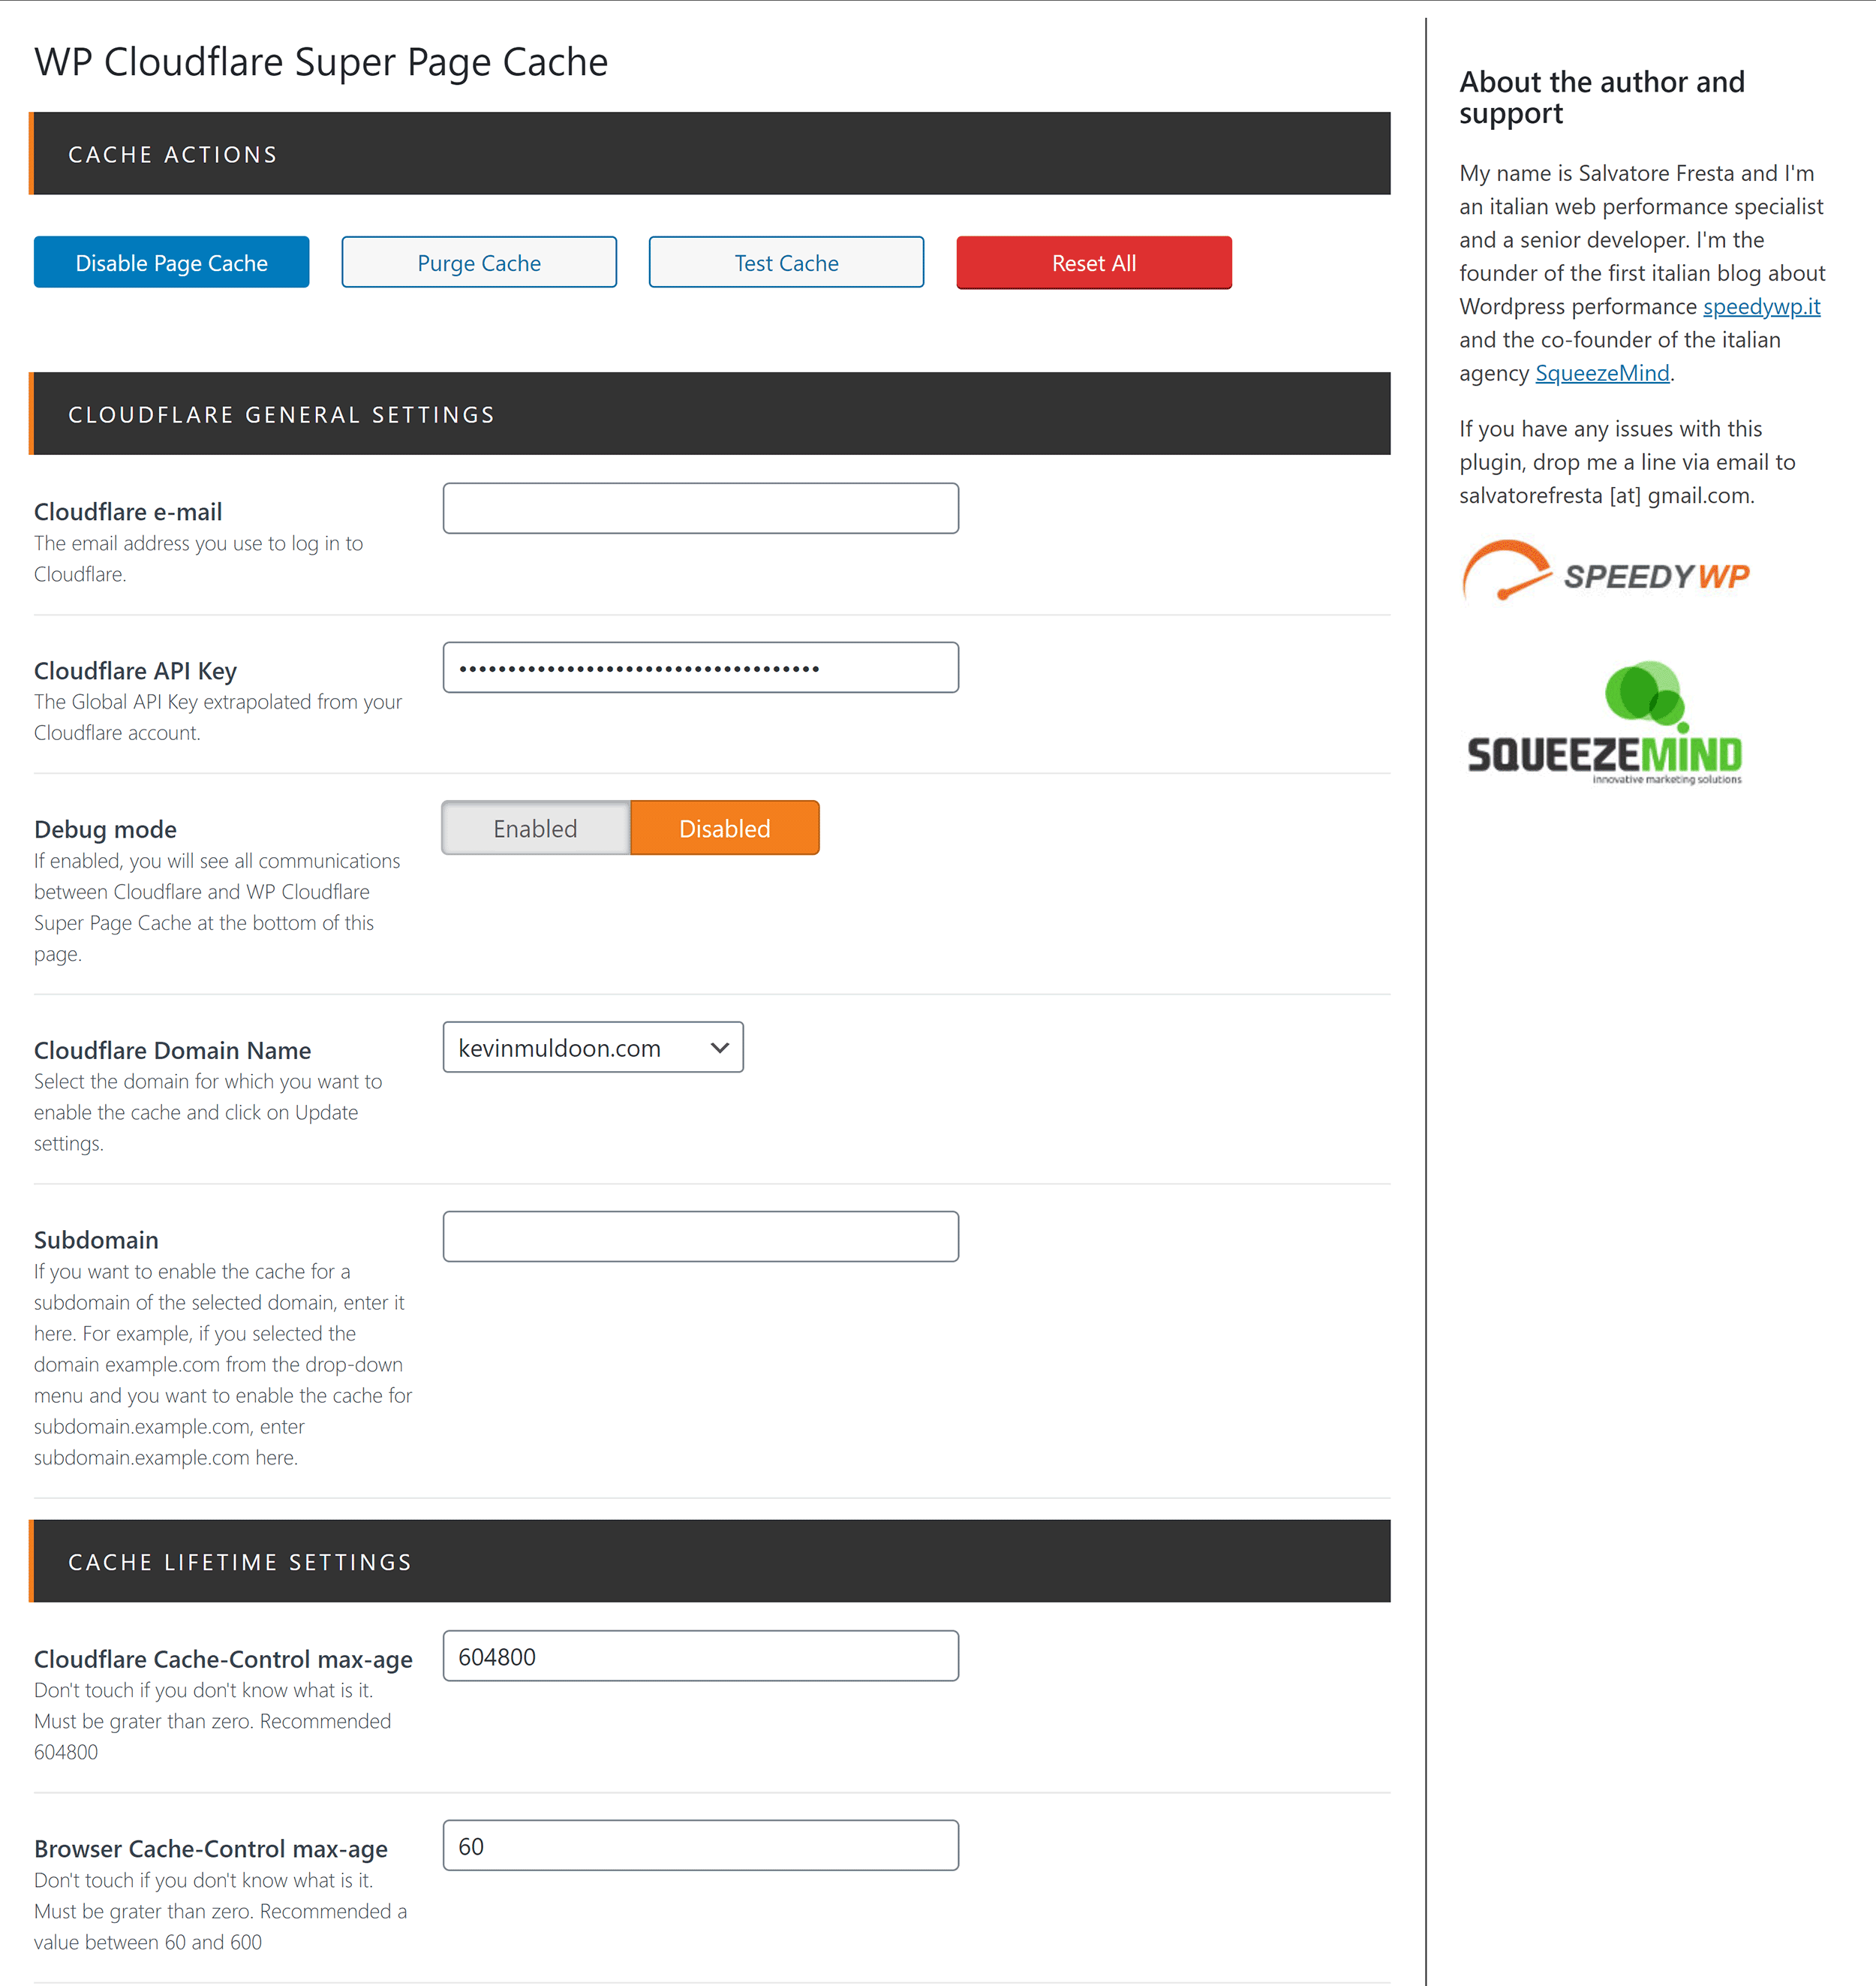 WP Cloudflare Super Page Cache General Settings